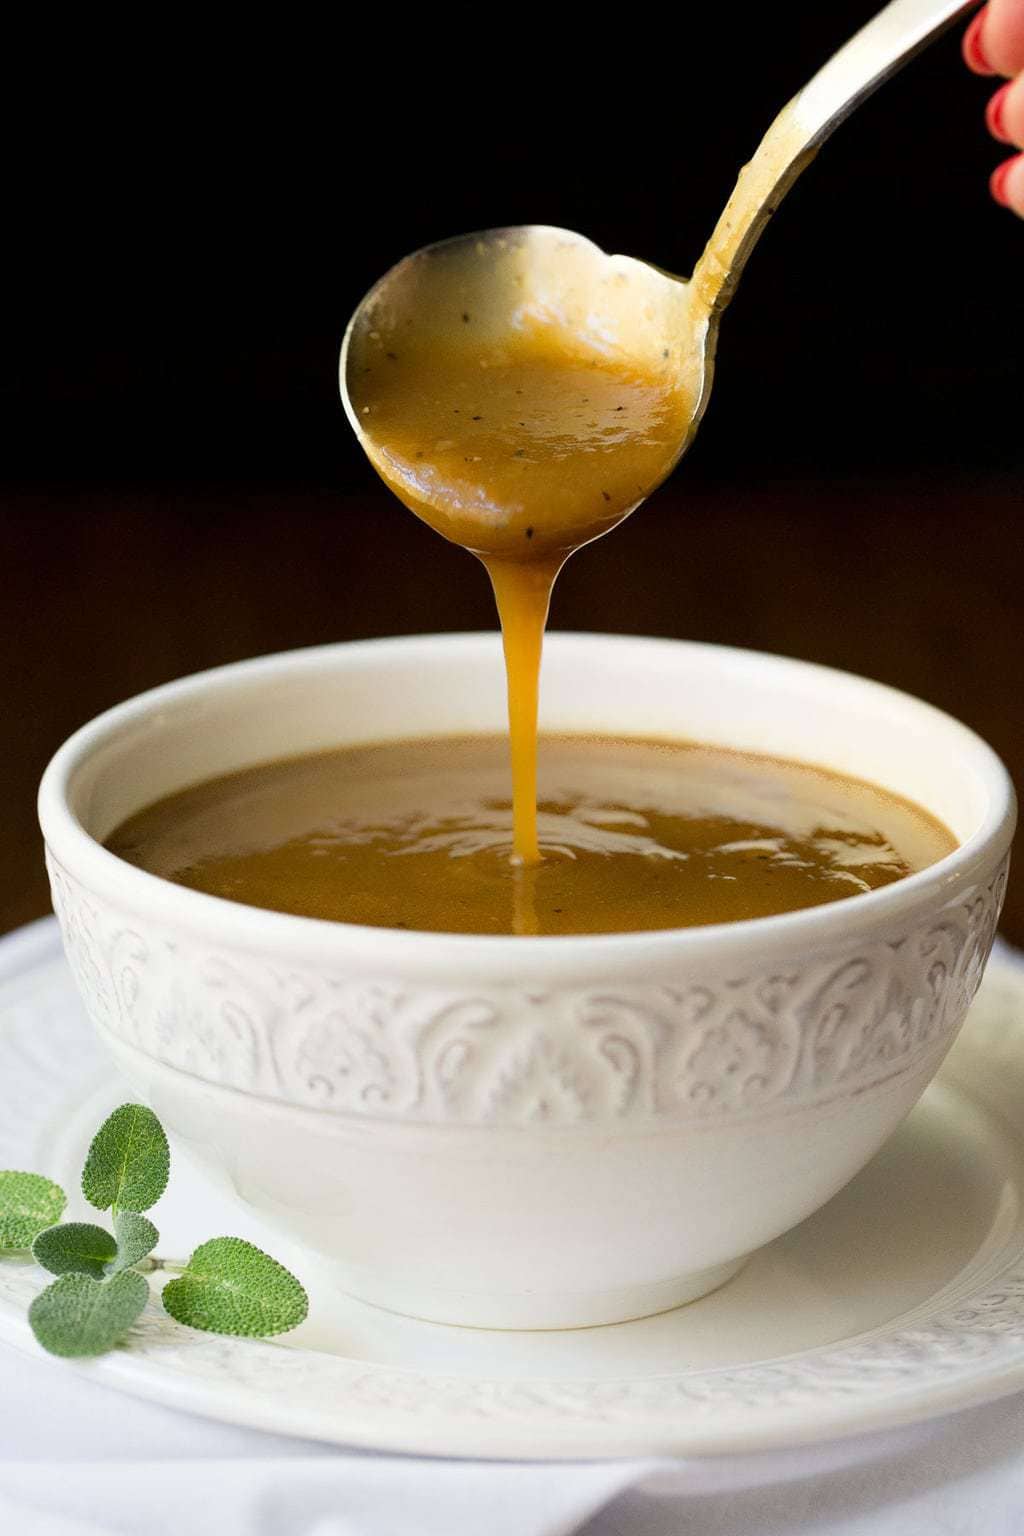 Vertical photo of Make-Ahead Gravy in a white serving bowl with a ladle pouring the gravy into the bowl.